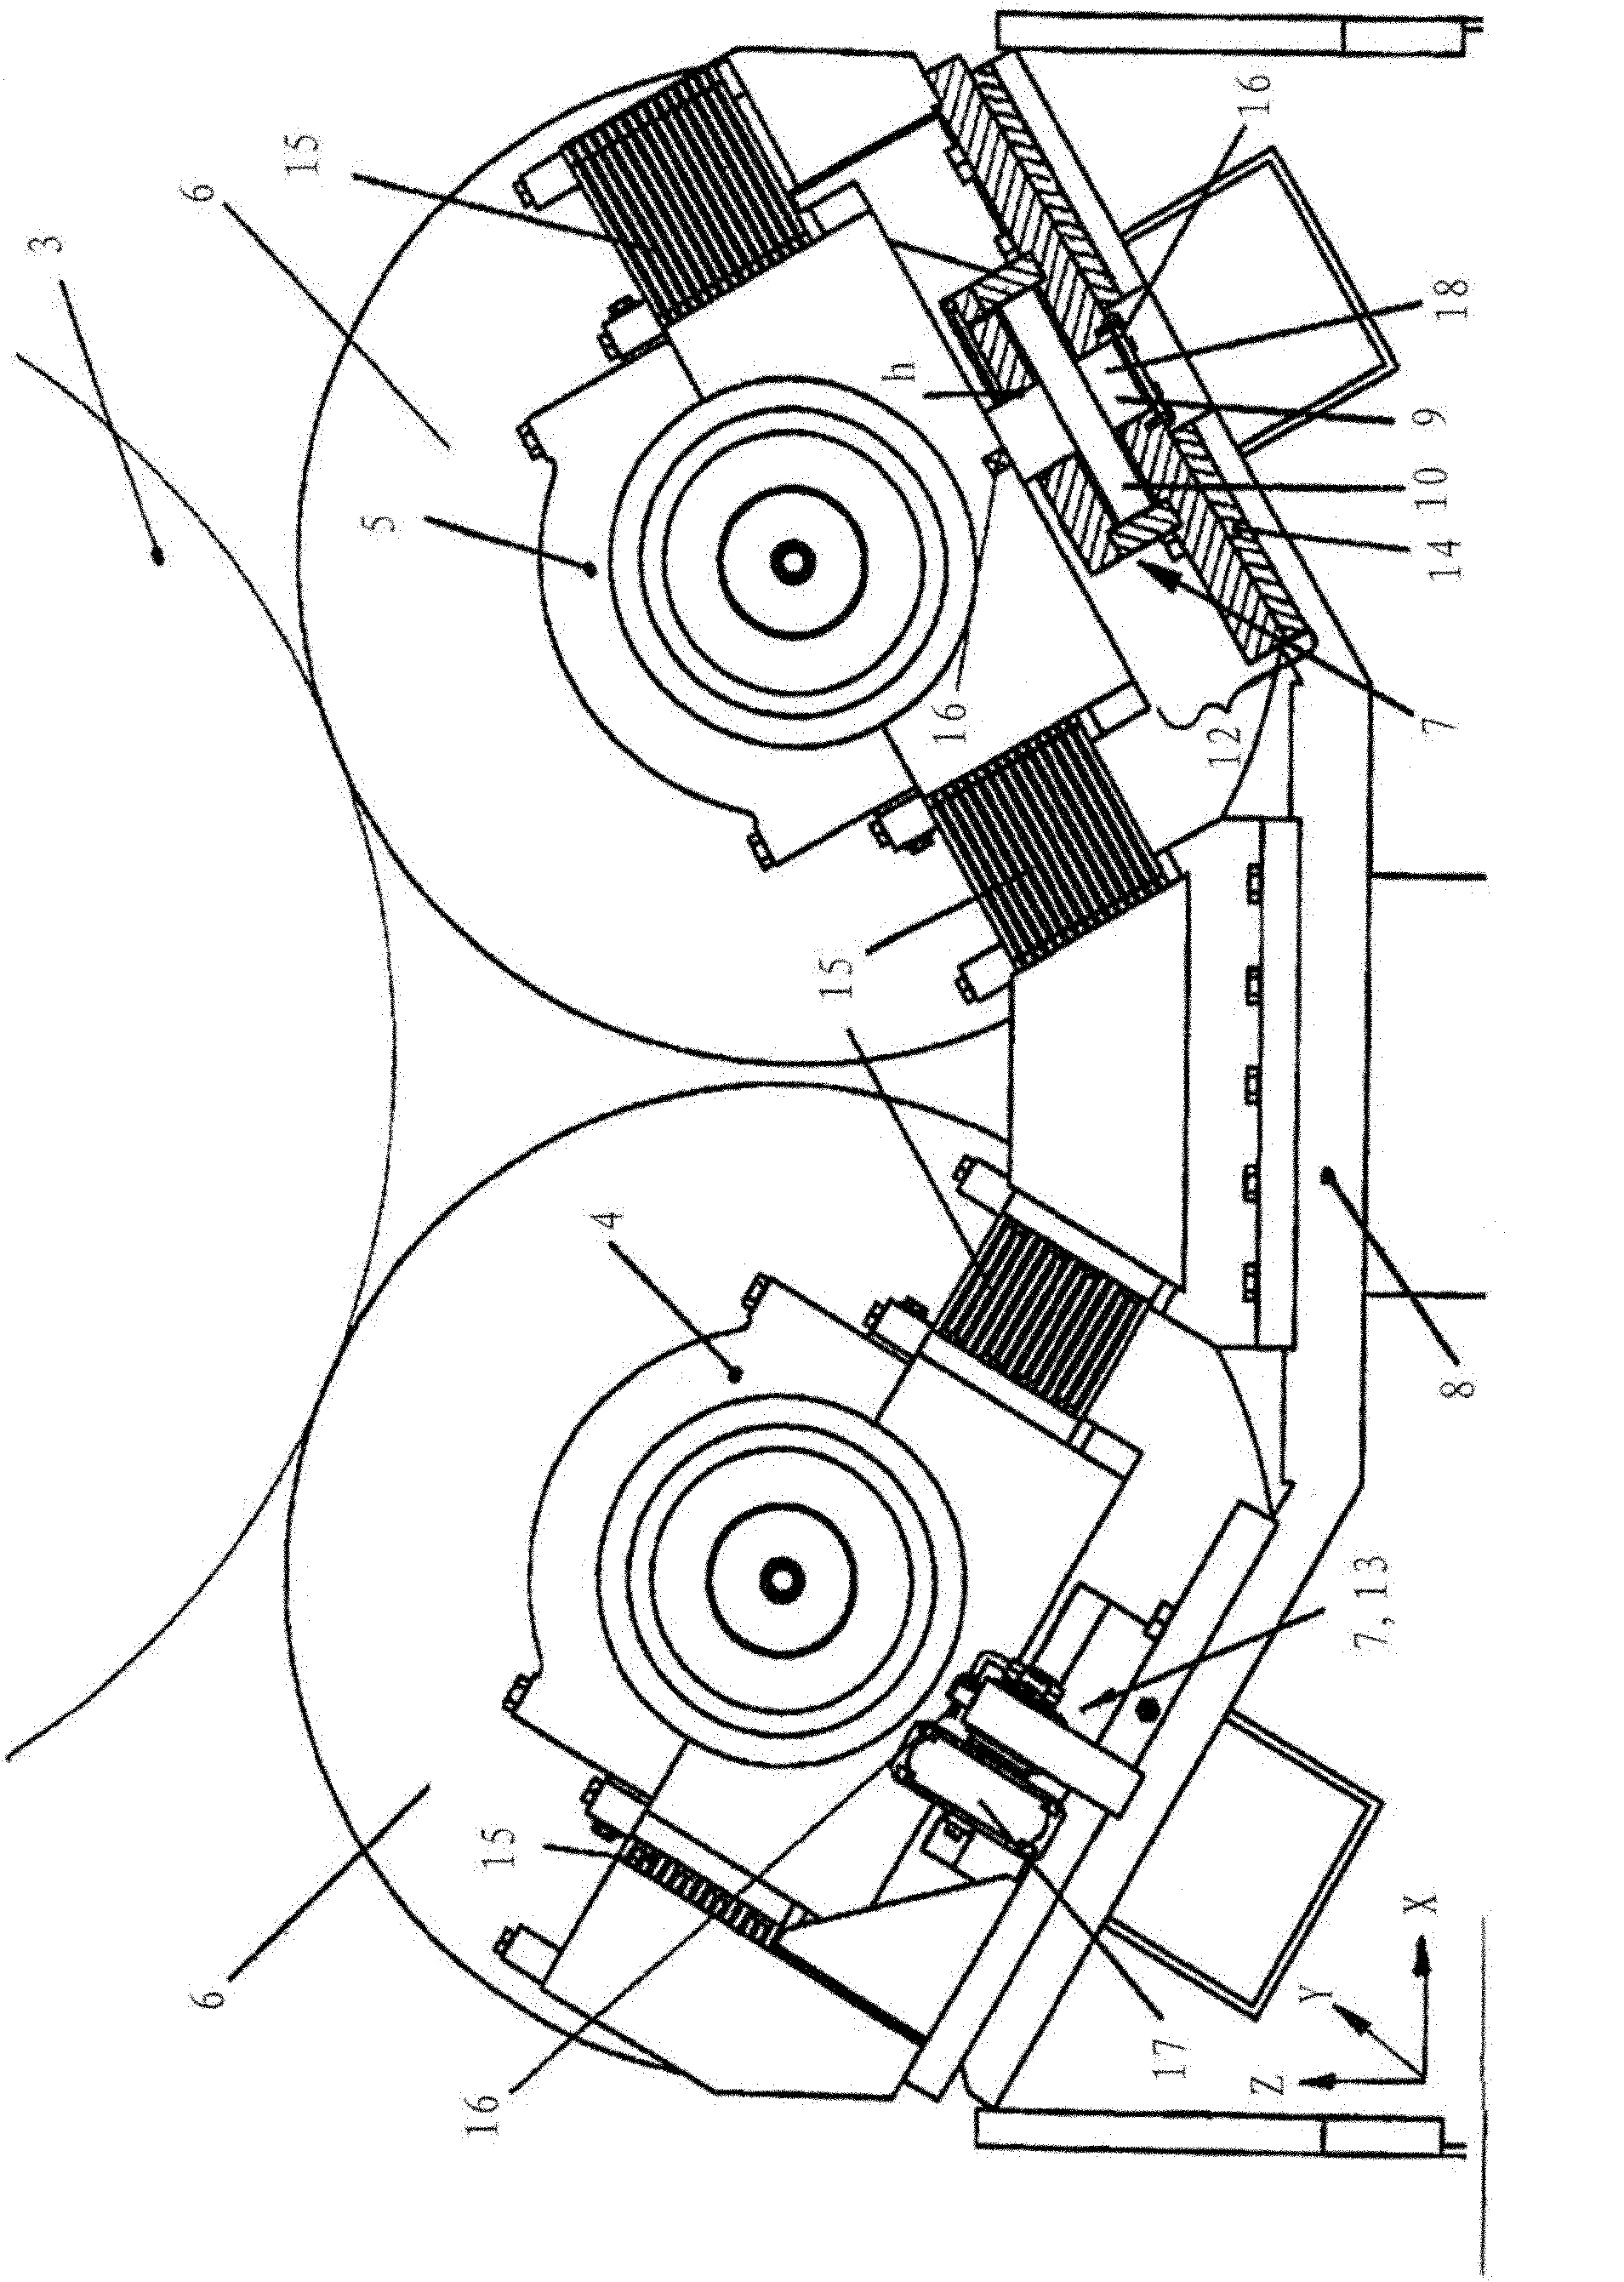 Roll winding device and method for winding a sheet of material